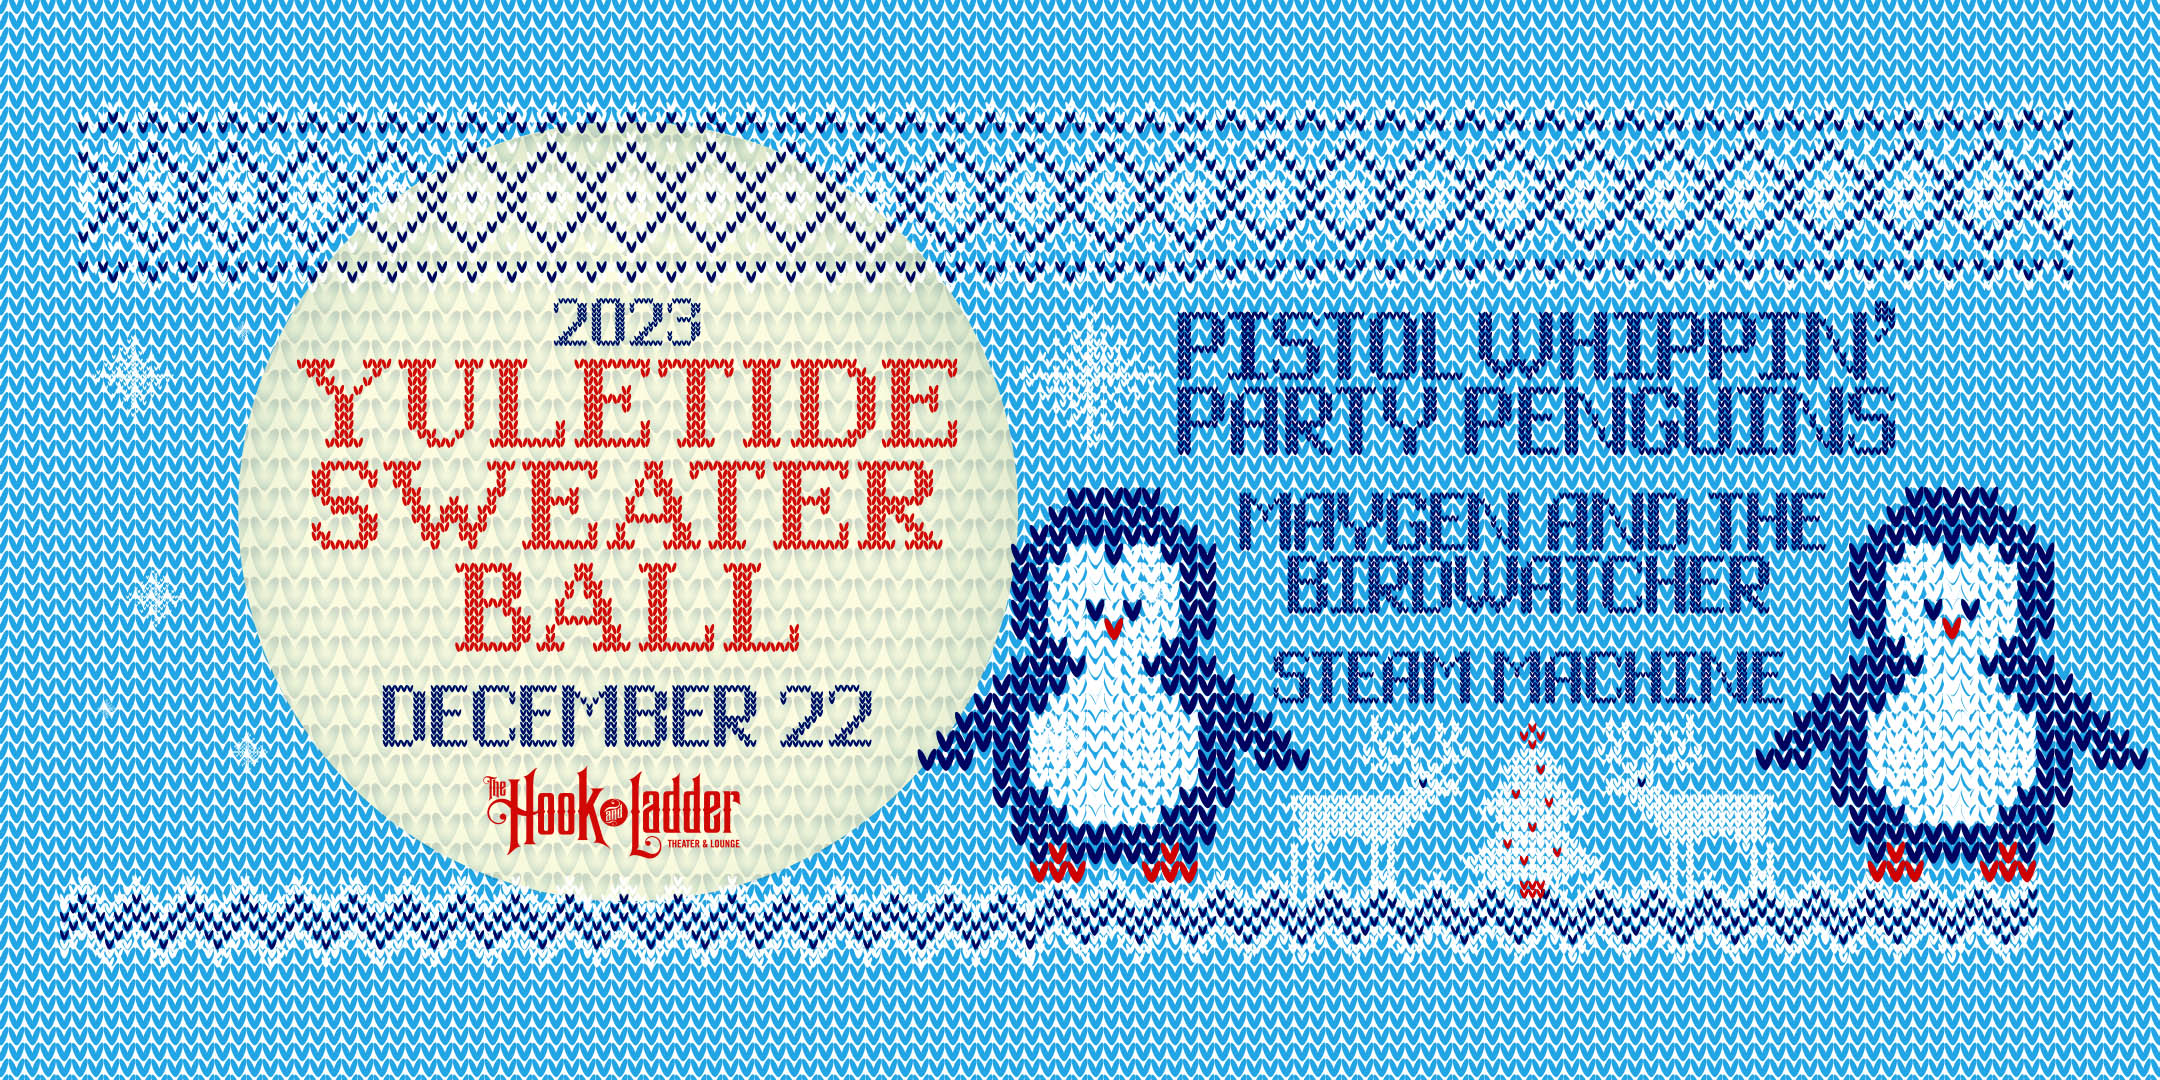 Yuletide Sweater Ball Pistol Whippin' Party Penguins with guests Maygen & the Birdwatcher, & Steam Machine Friday, December 22, 2022 The Hook and Ladder Theater Doors 7:30pm :: Music 8:00pm :: 21+ General Admission*: $15 EARLY / $20 ADV / $25 DOS *Does not include fees NO REFUNDS